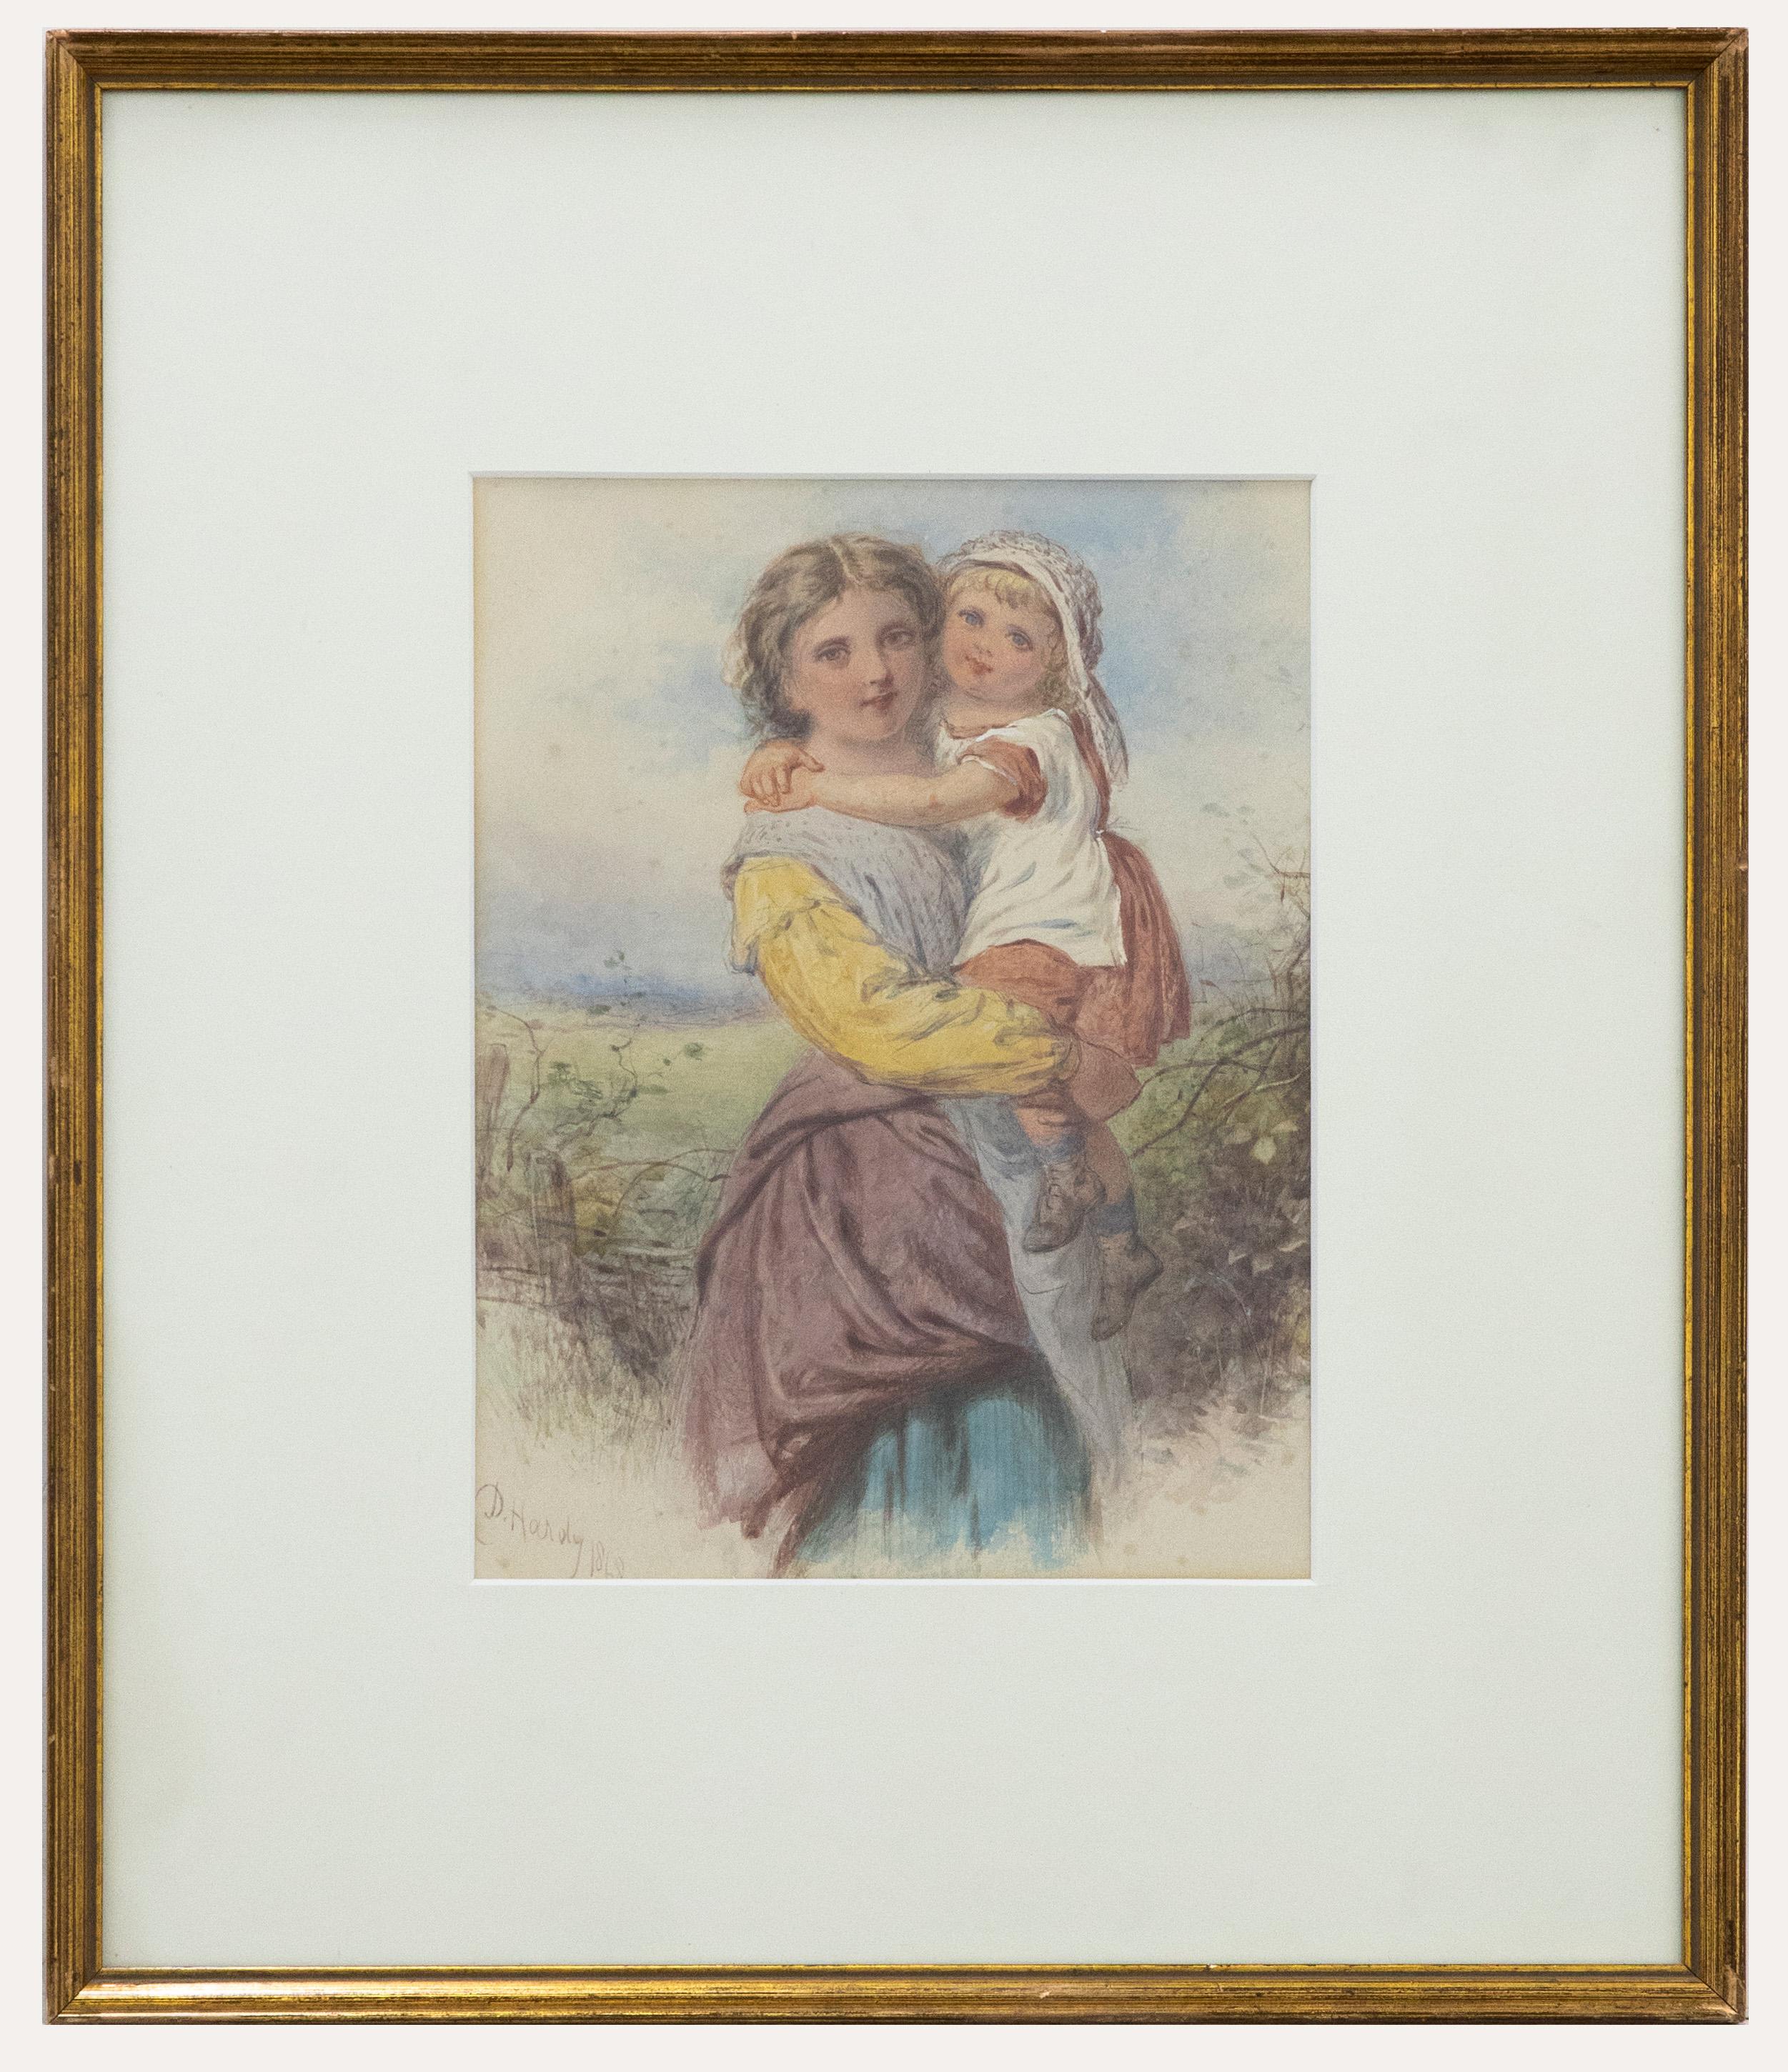 A charming 19th century watercolour, showing an older sister, holding her younger sister in her arms as the two embrace with soft smiles. The artist has signed and dated to the lower left corner and the painting has been presented in a simple gilt